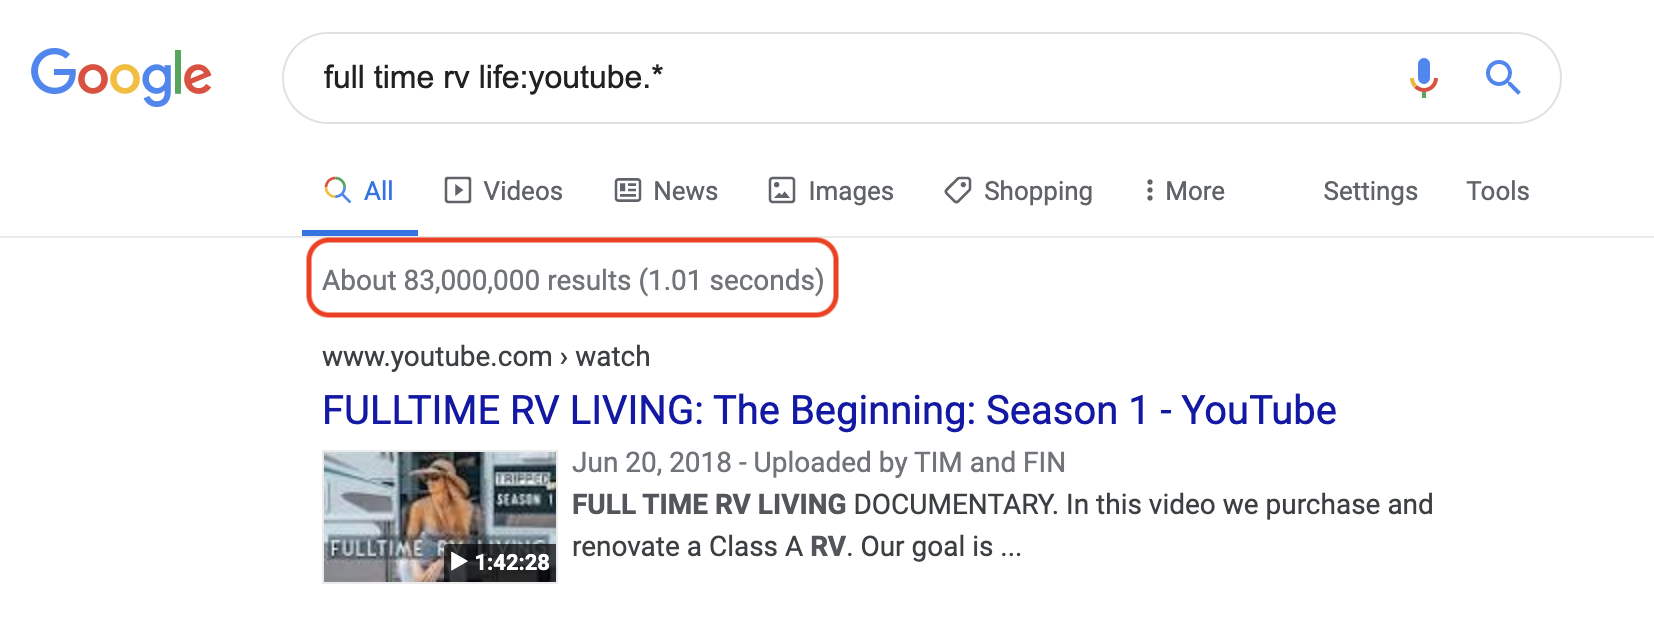 SEO For YouTube: How To Get More Views On YouTube for Free 2